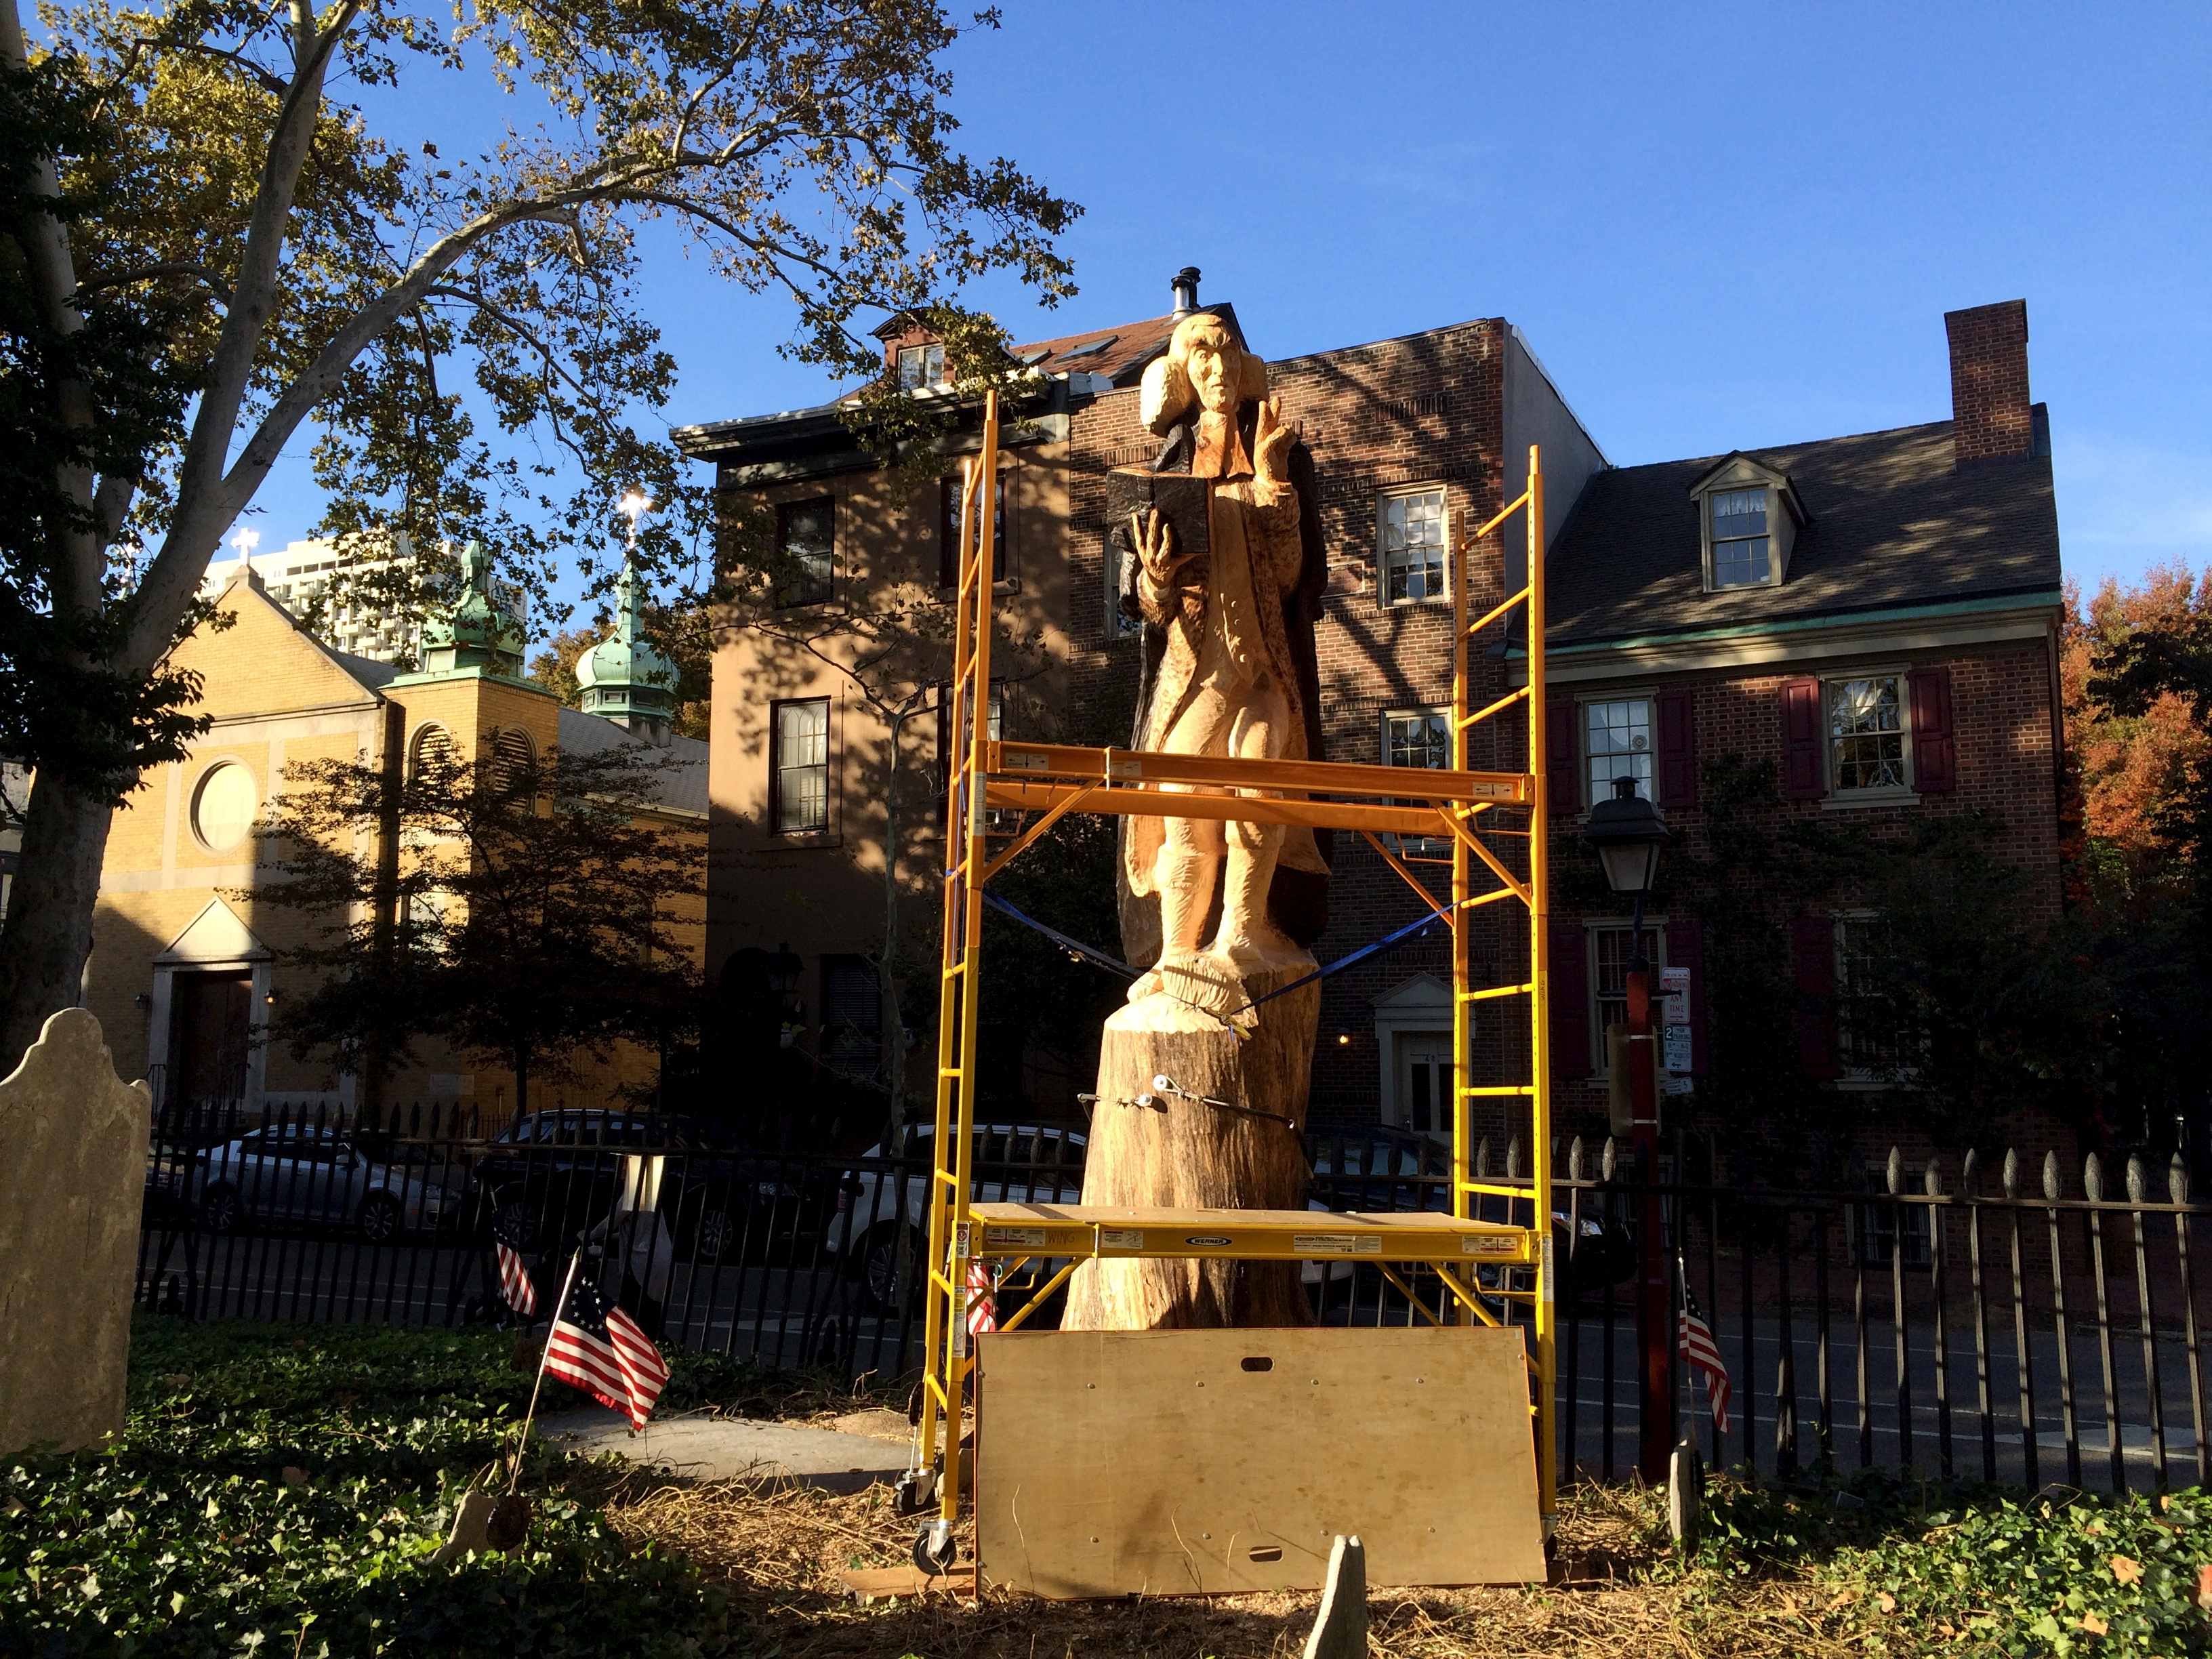 Roger Wing's sculpture of George Duffield nearing completion